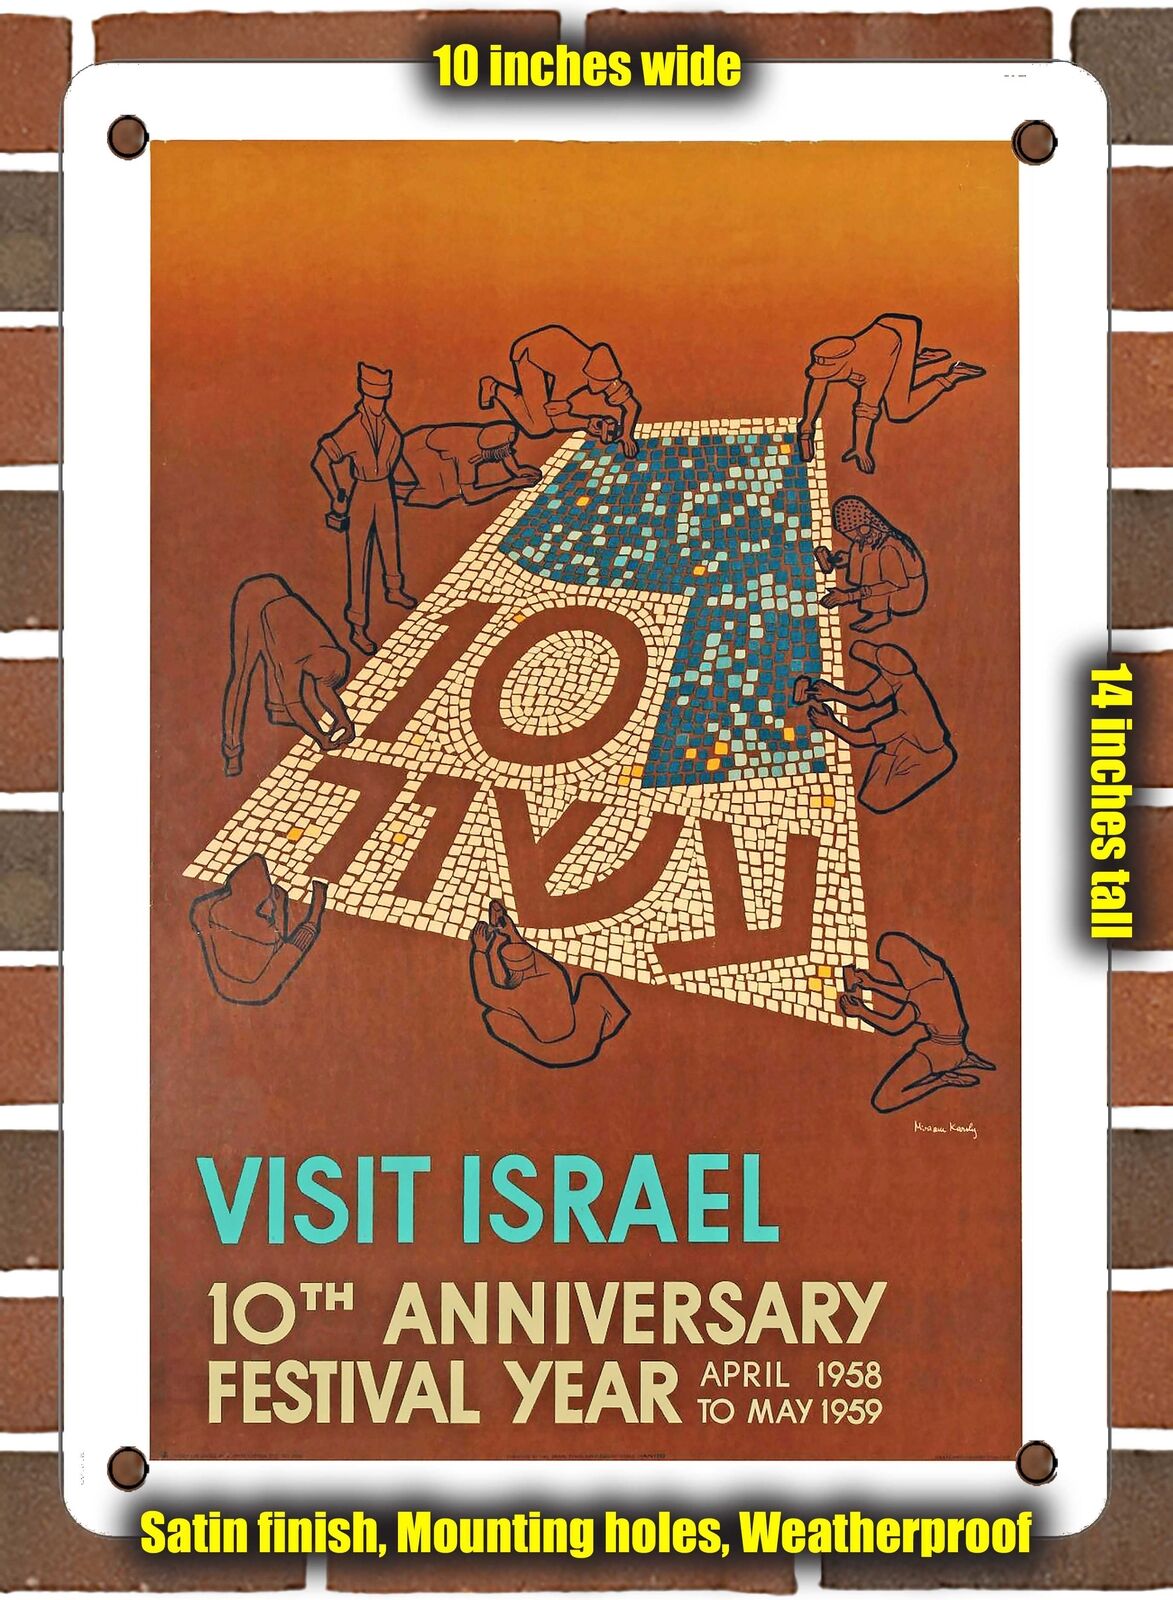 METAL SIGN - 1958 Visit Israel 10th Anniversary Festival Year - 10x14 Inches